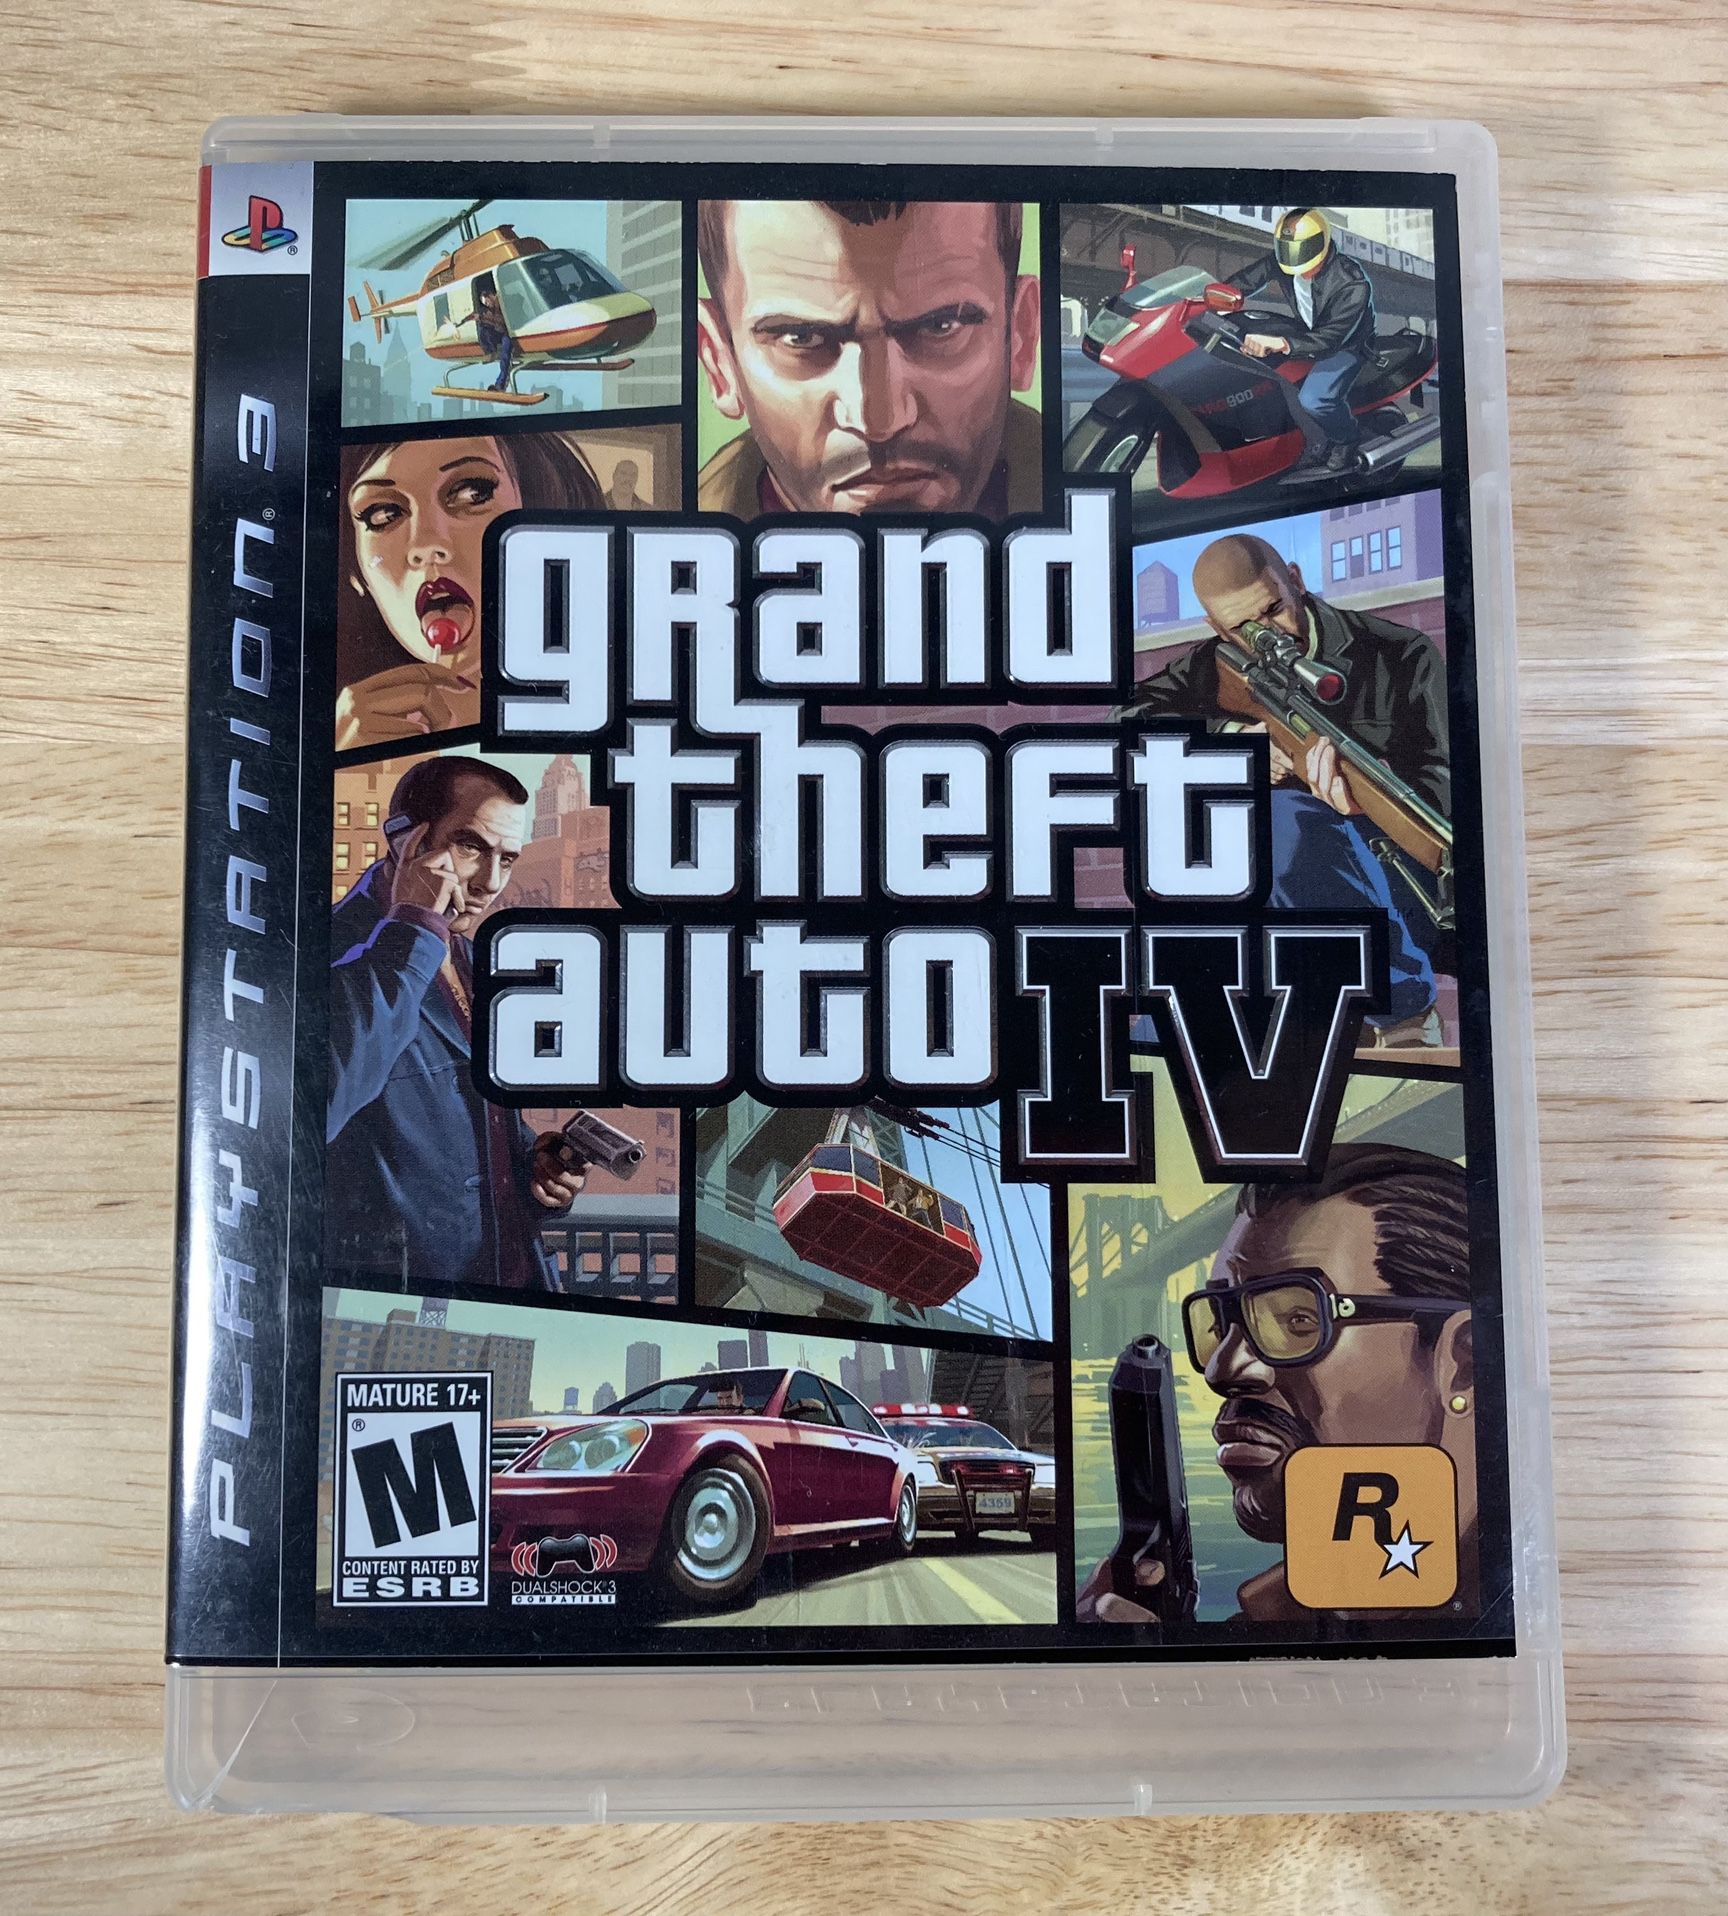 Grand Theft Auto IV on PlayStation 3 (PS3)